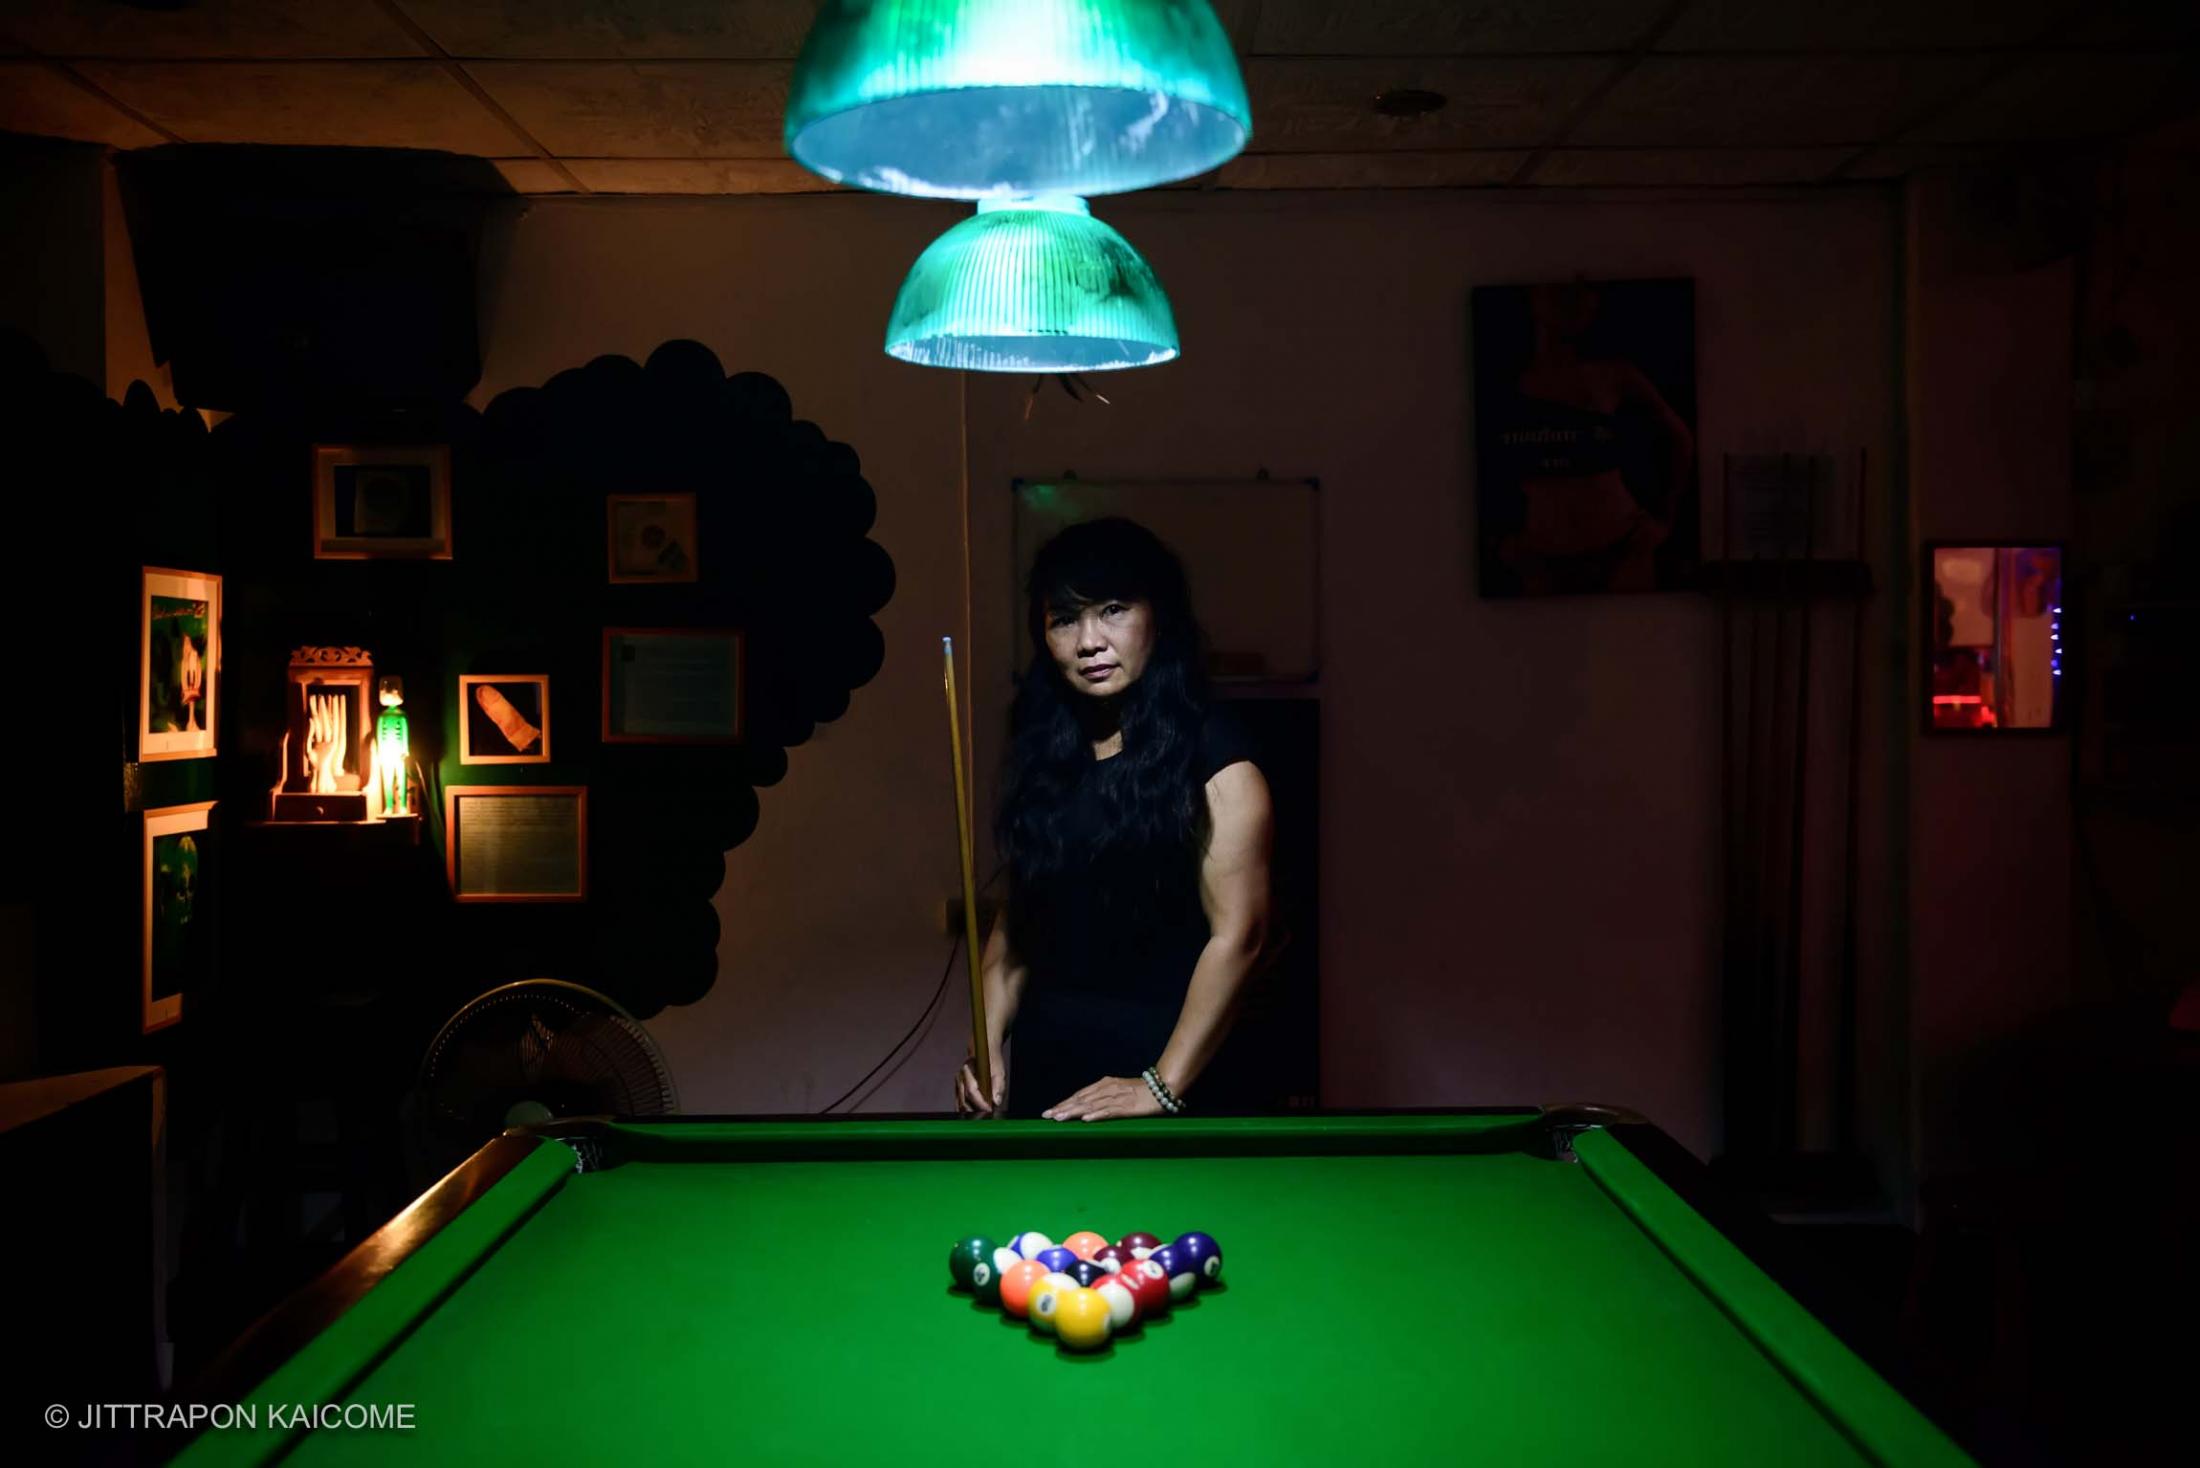 Madam Ping Pong, a sex worker at the bar. Working as a coordinator for Empower, managing a public performance about sex workers and human rights defender for sex workers in Thailand.